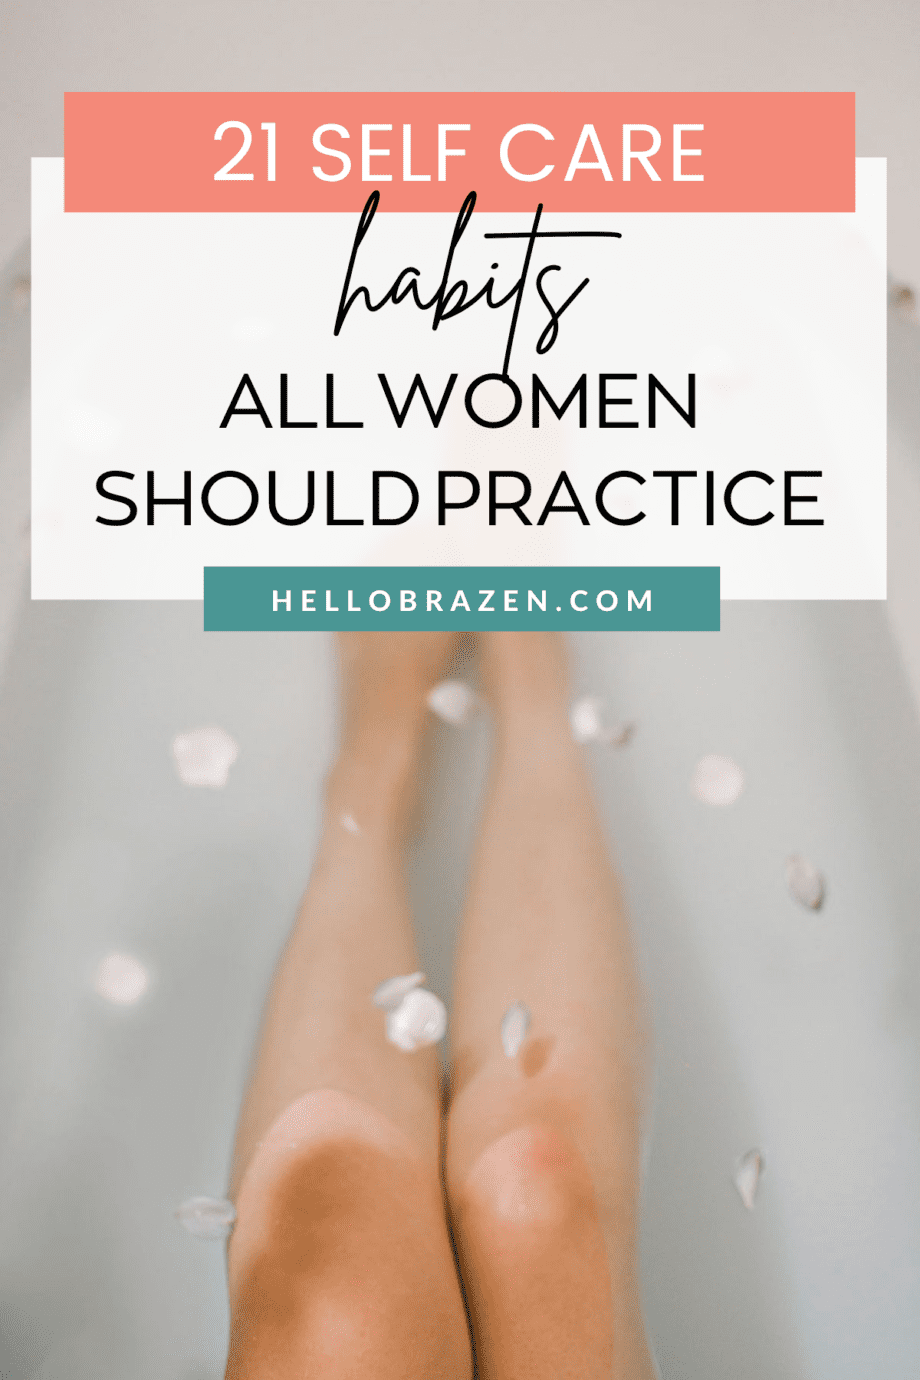 As women, self care shouldn't be considered a luxury upgrade to our lives, or make us feel like we are being selfish. Self care is simple habits that will help us to live our best, most healthy, and joyful lives. Here are 21 self care habits every woman should practice.